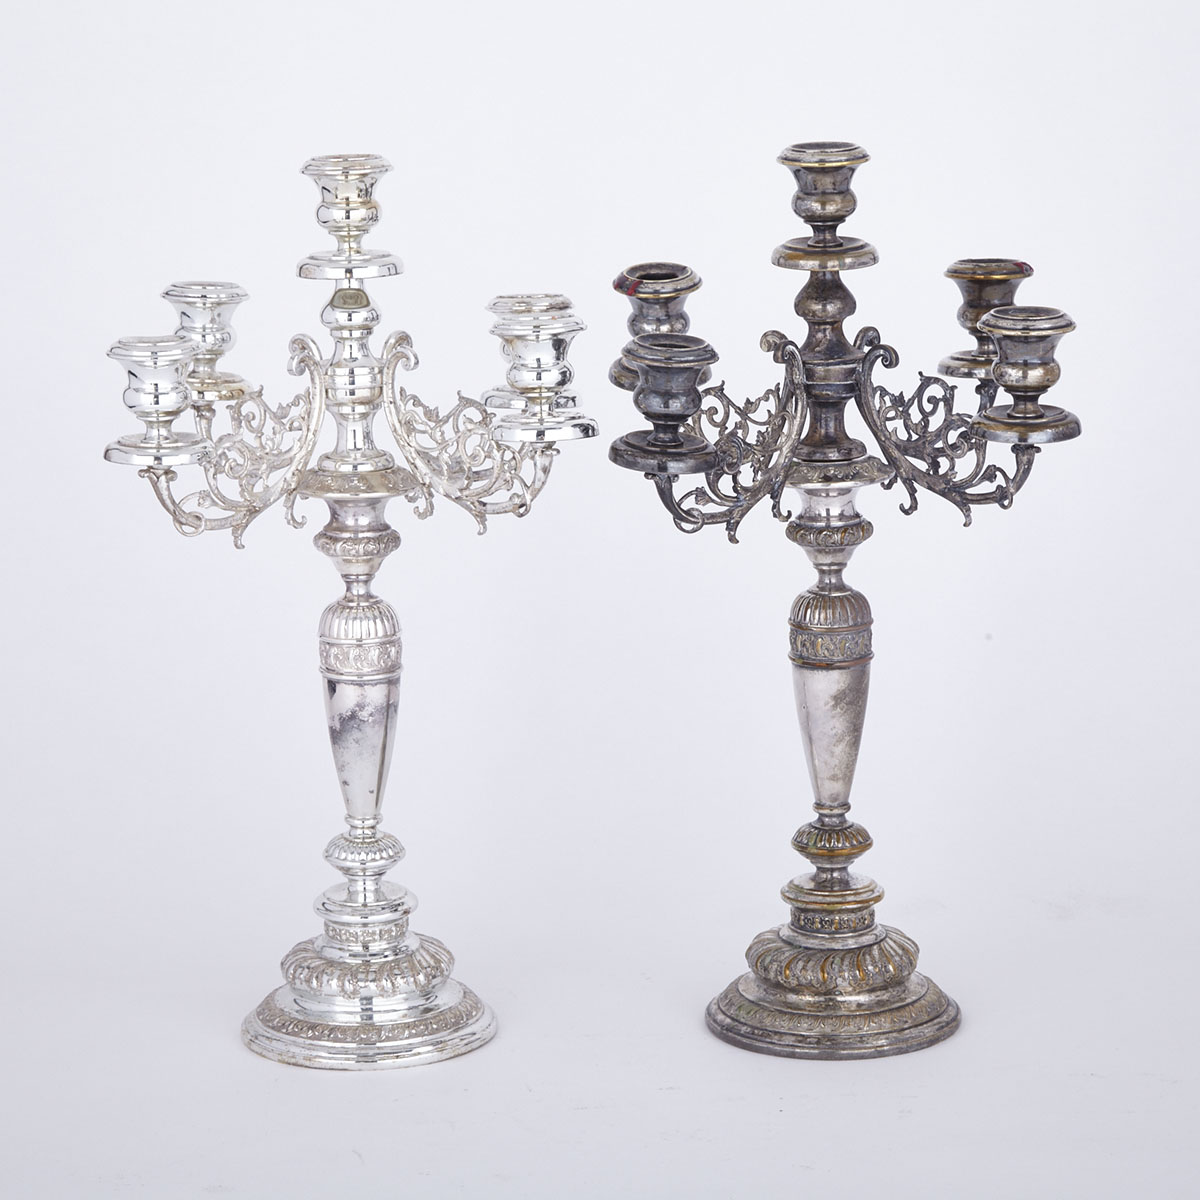 Pair of Continental Silver Plated Five-Light Candelabra, late 19th/early 20th century